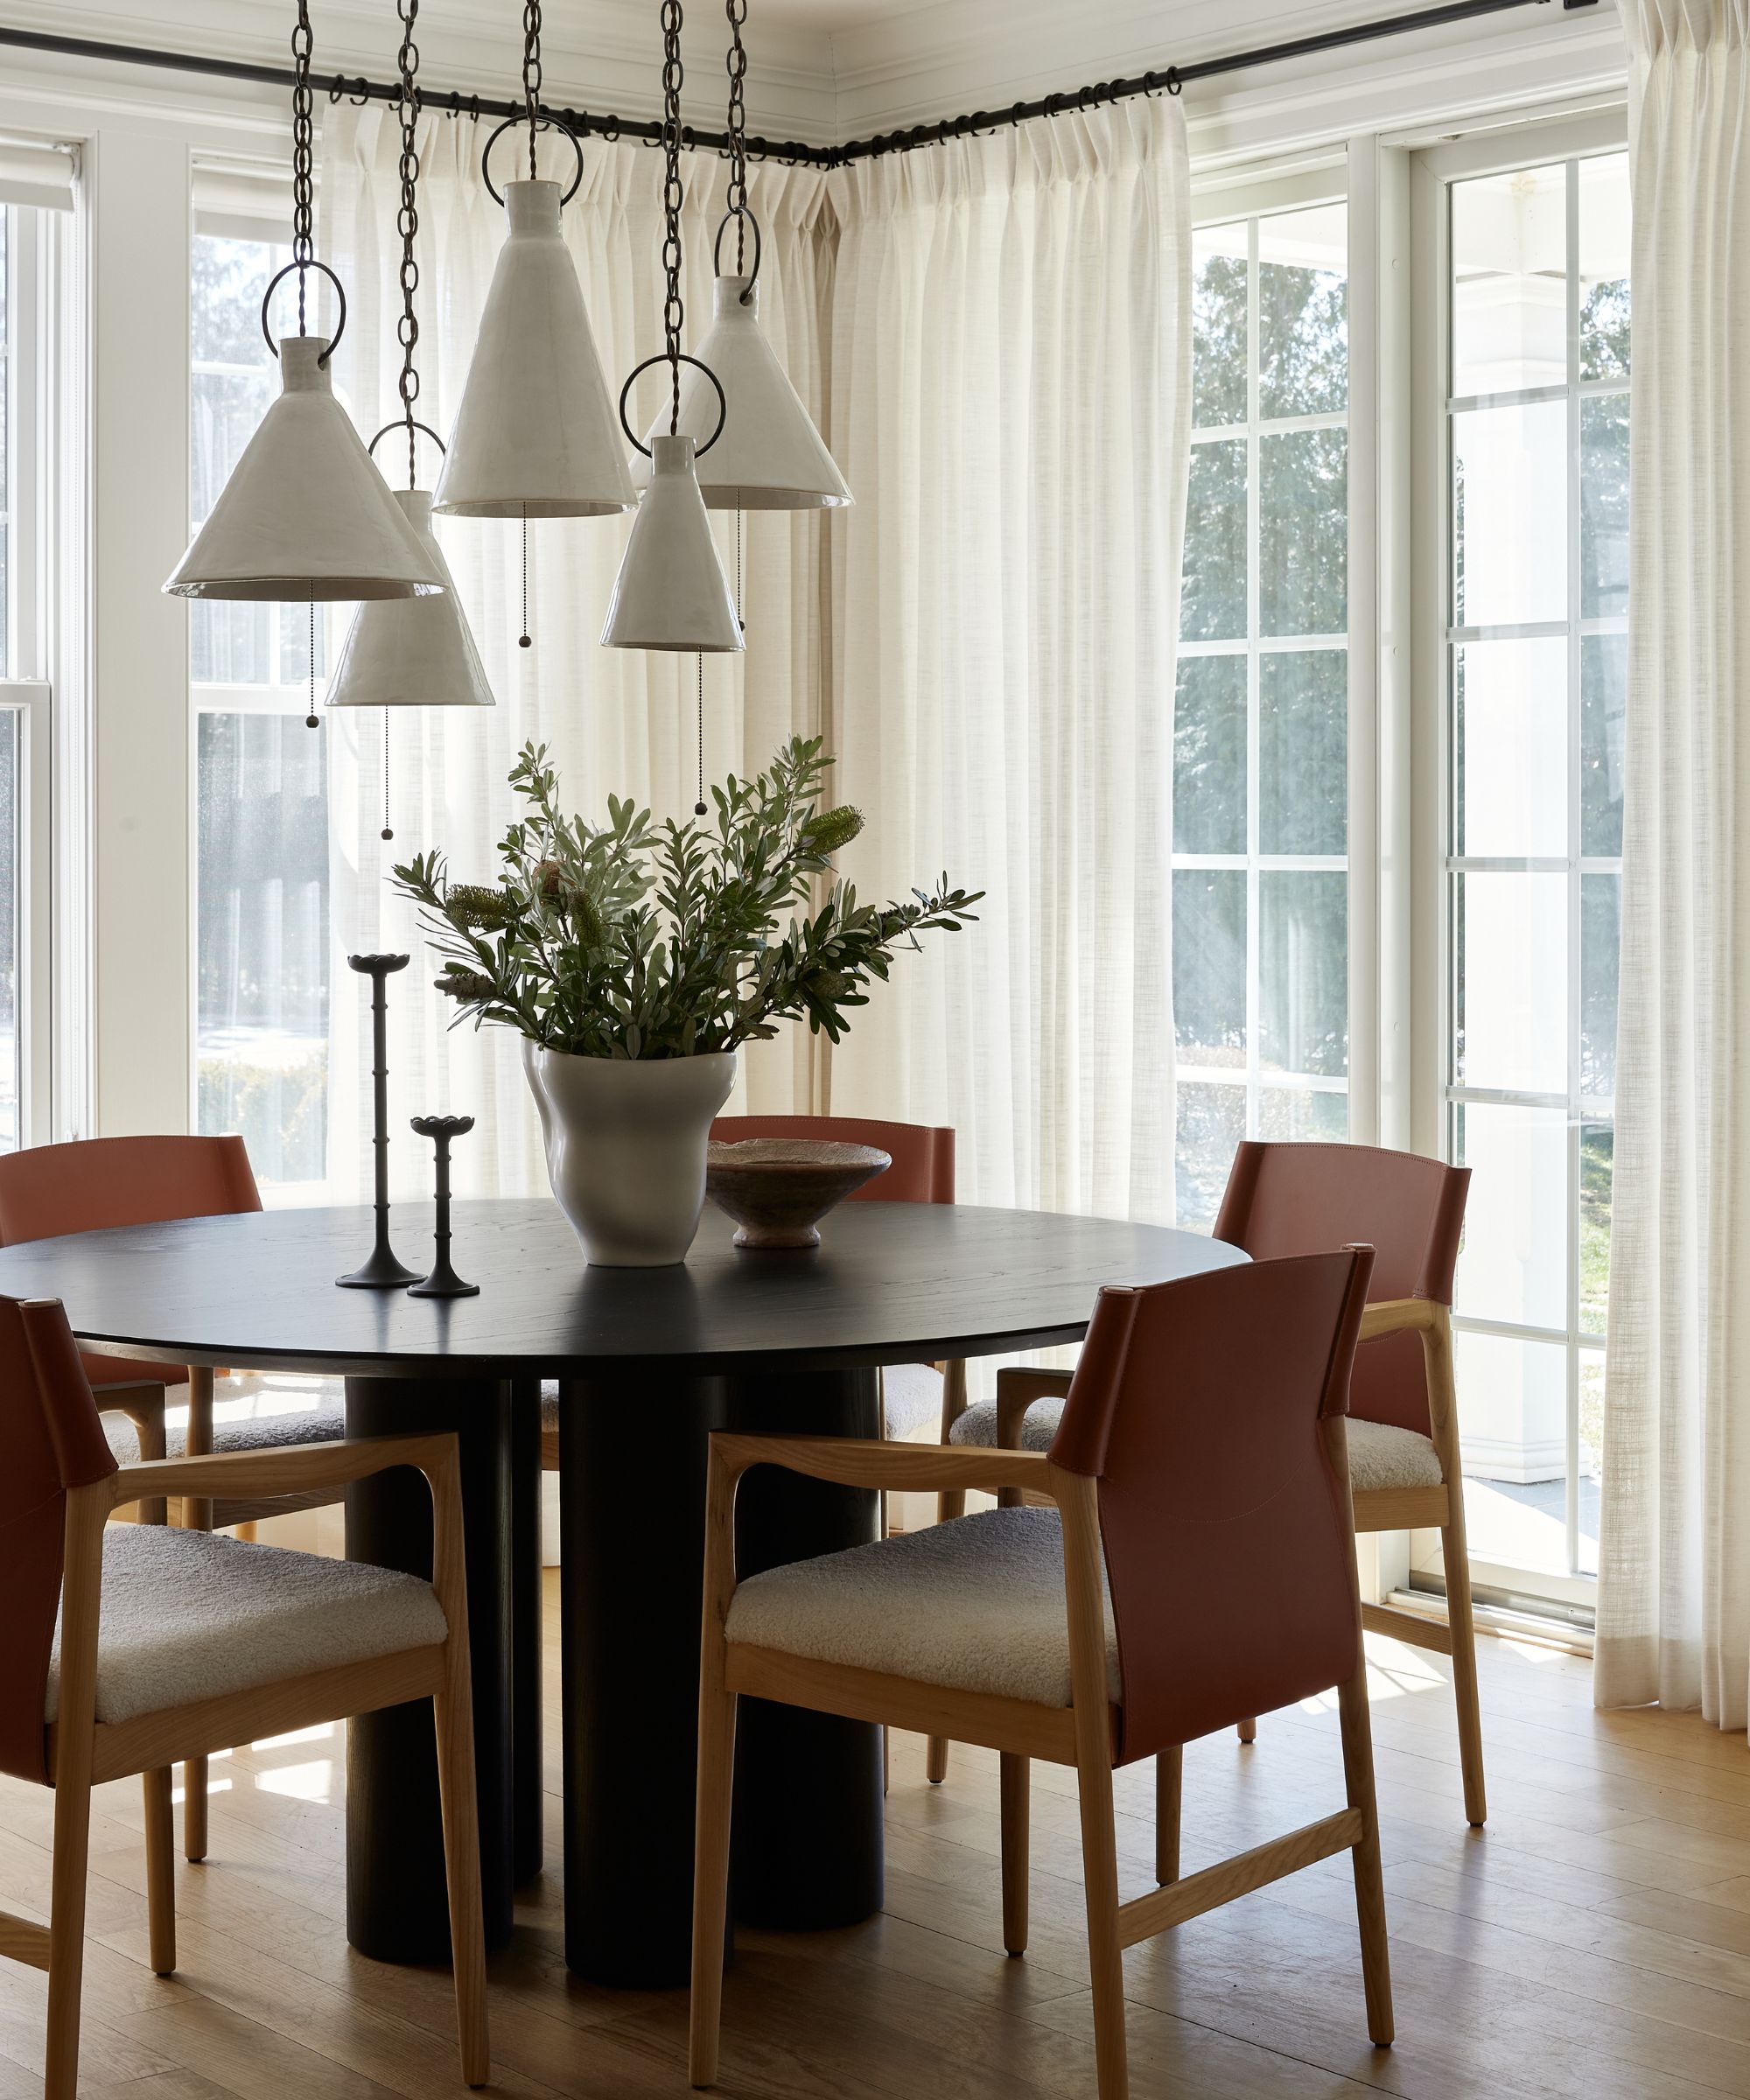 dining nook in window with round black table